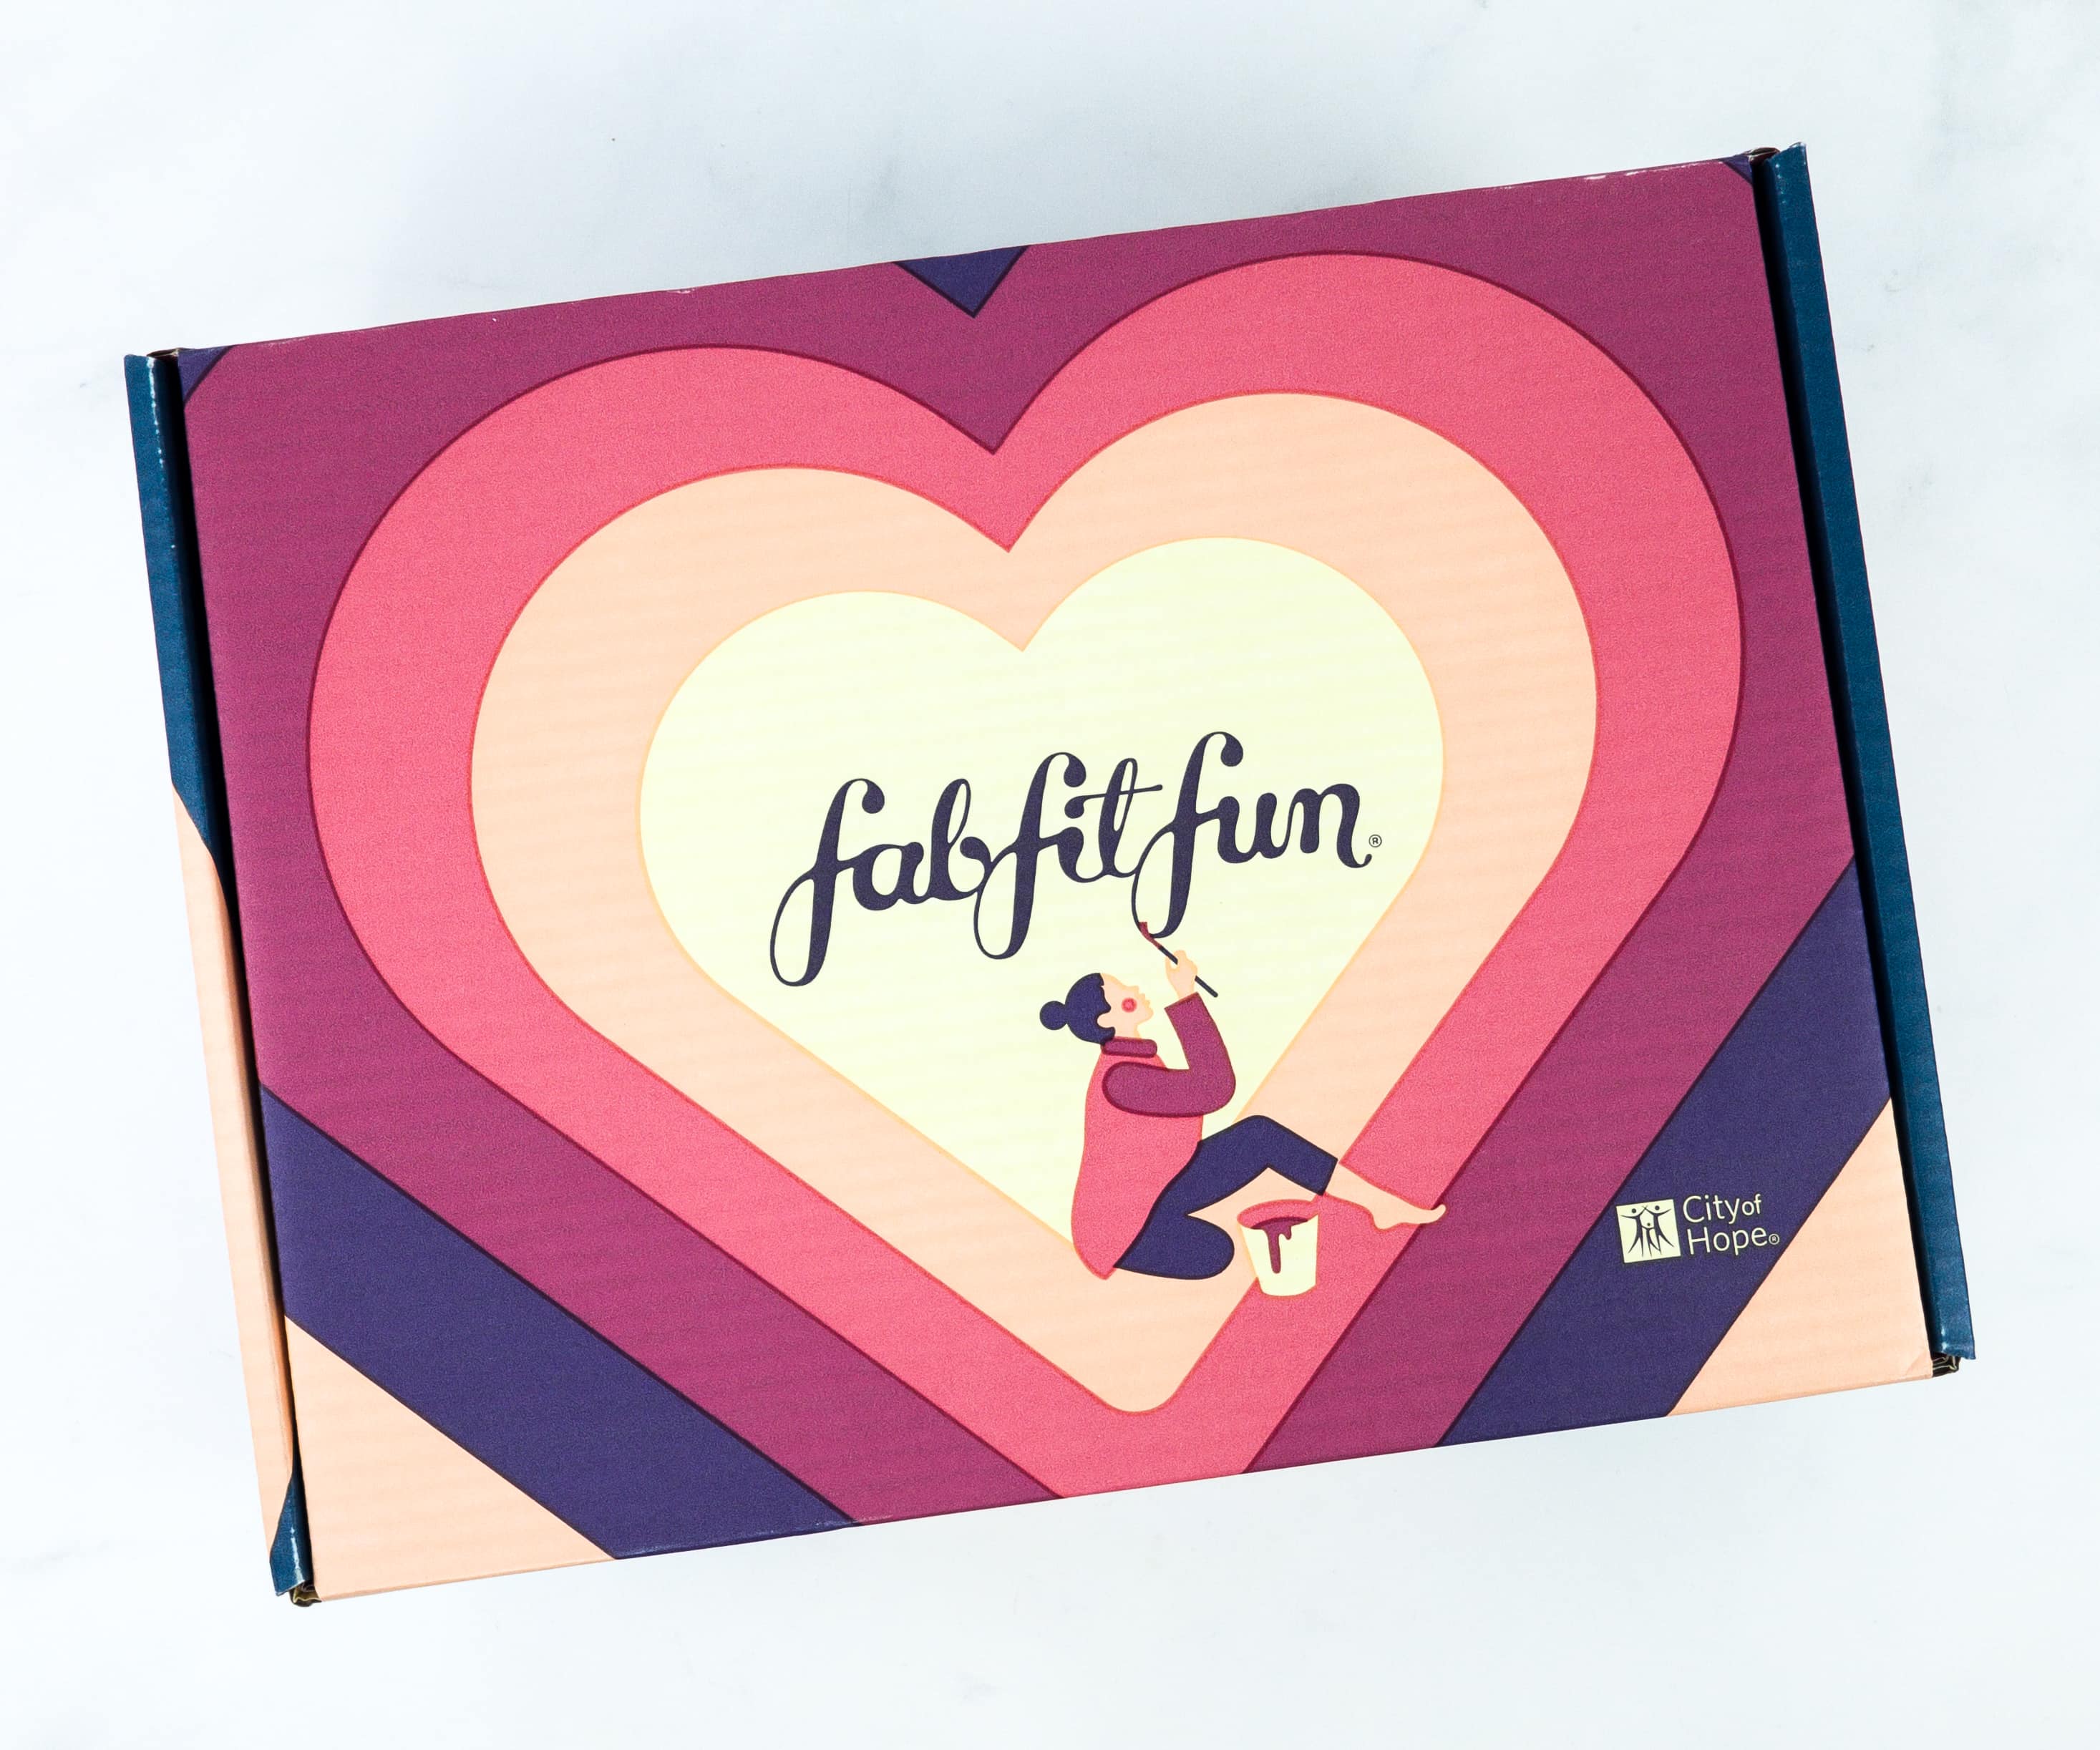 Why Everyone Is Obsessed With the Fall Box - FabFitFun